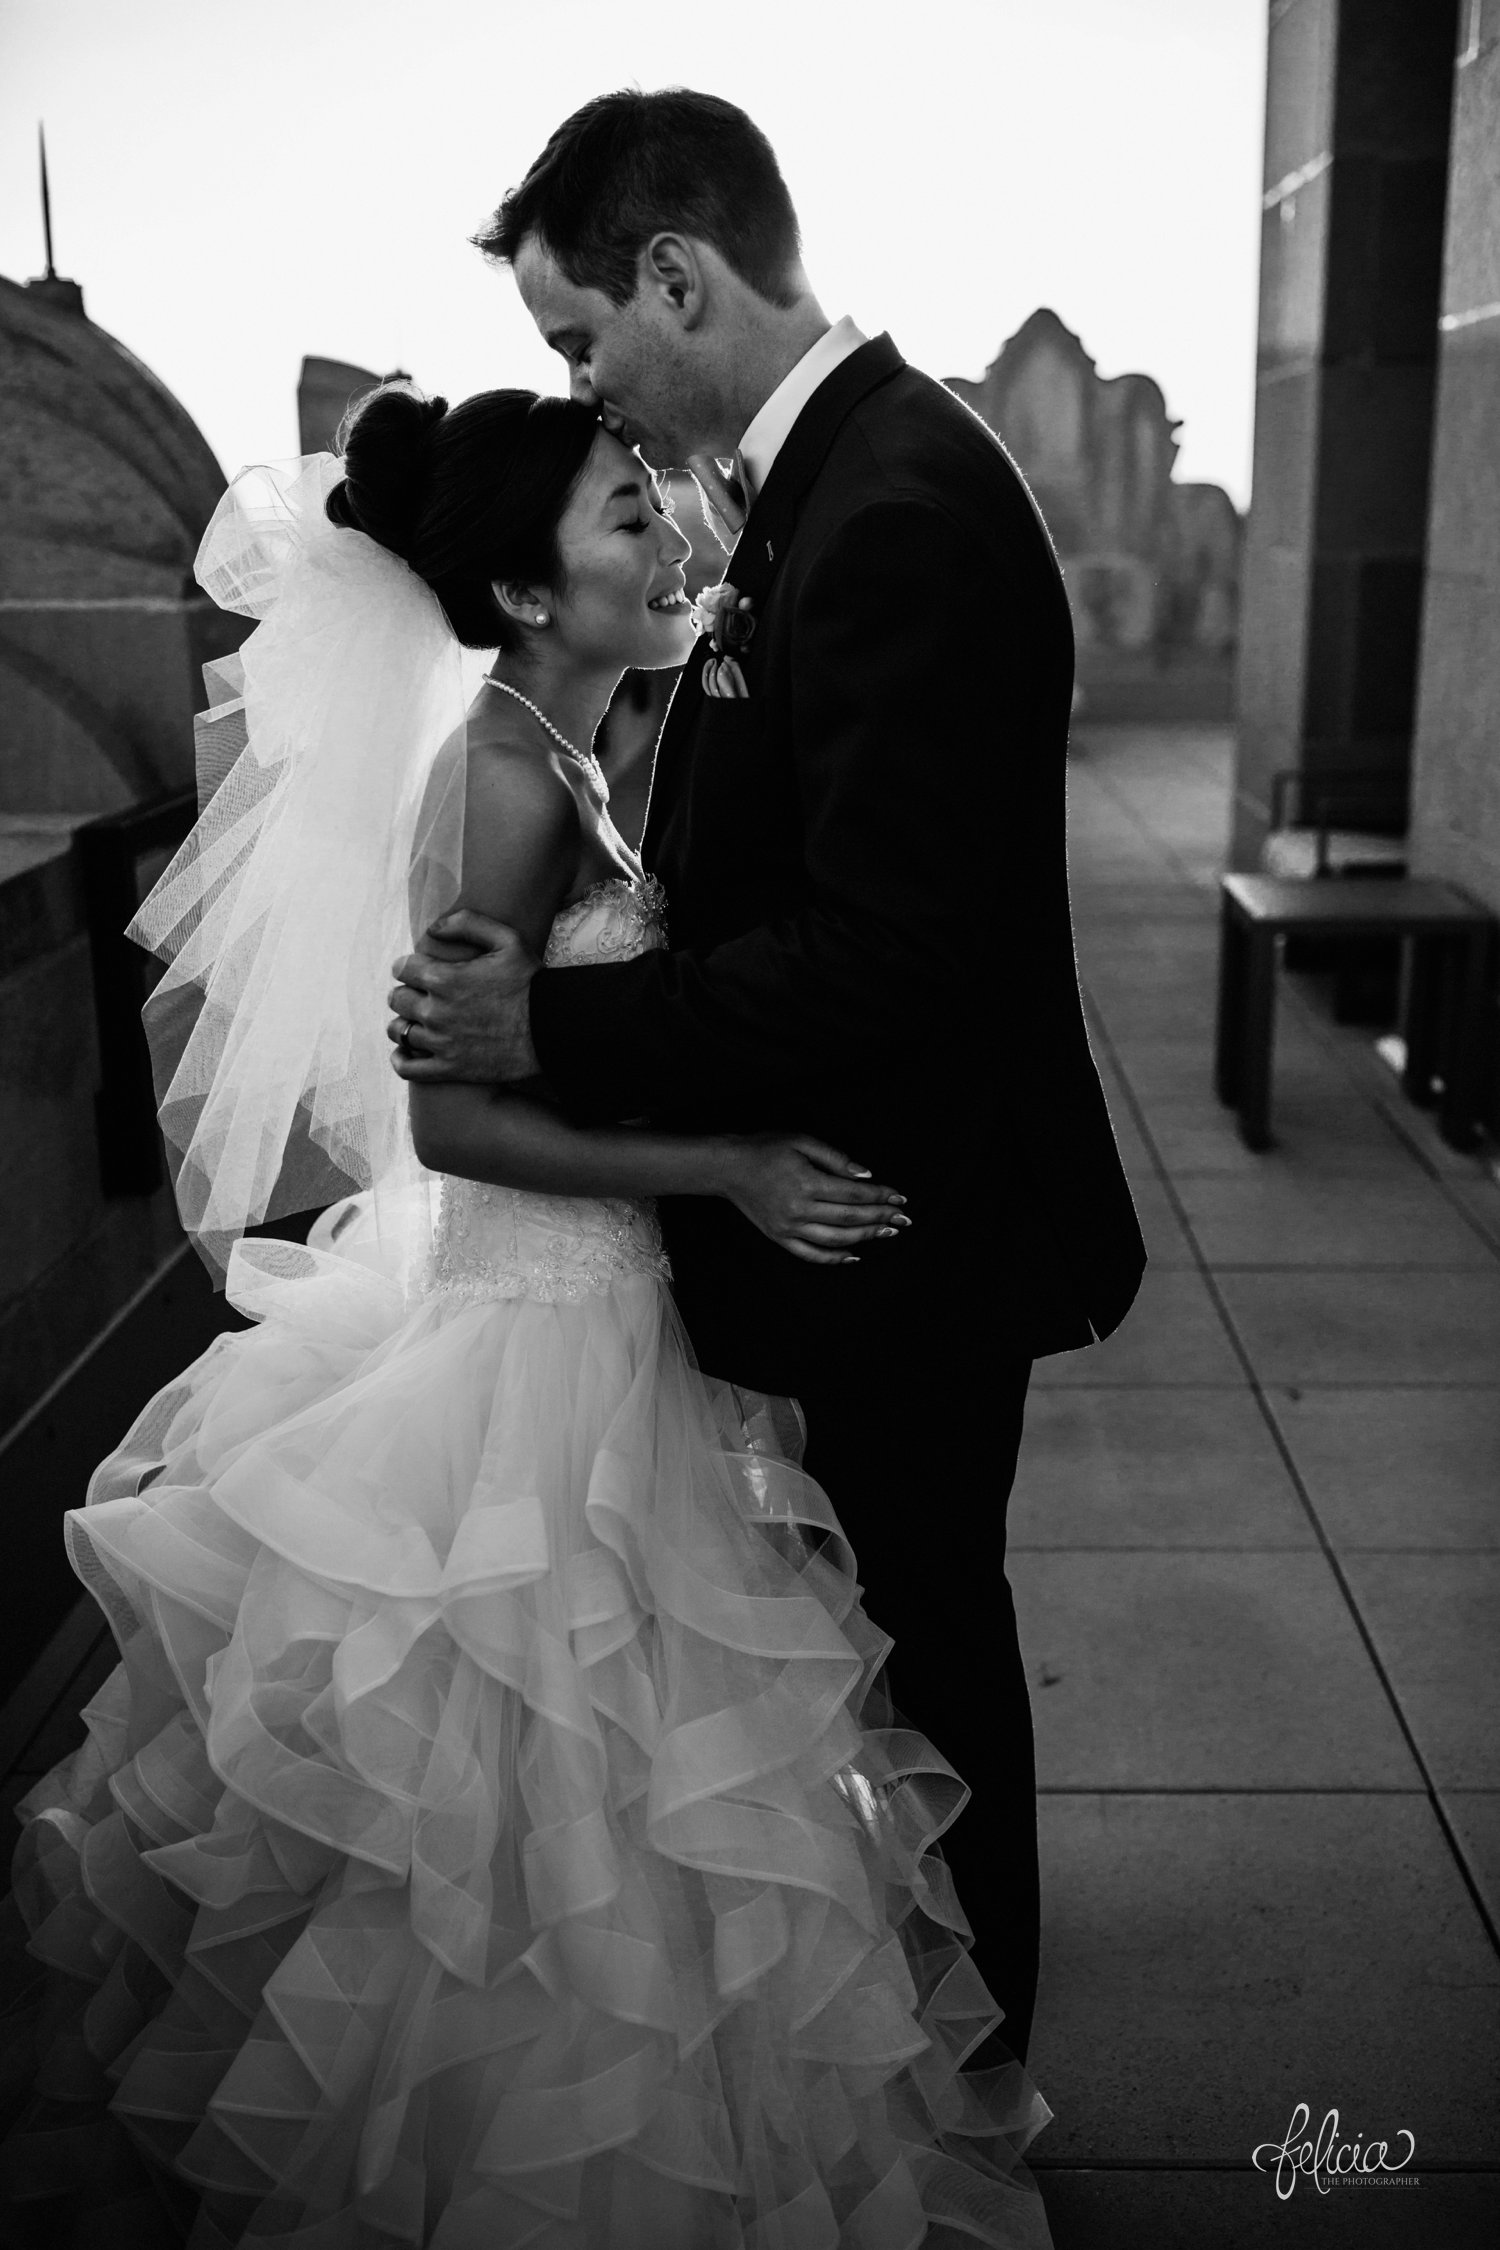 images by feliciathephotographer.com | destination wedding photographer | the grand hall at power and light | kansas city | missouri | downtown | glamorous | multicultural | sunset | golden hour | couple portraits | rooftop | romantic | natural light | pearl necklace | bow tie | black and white | 